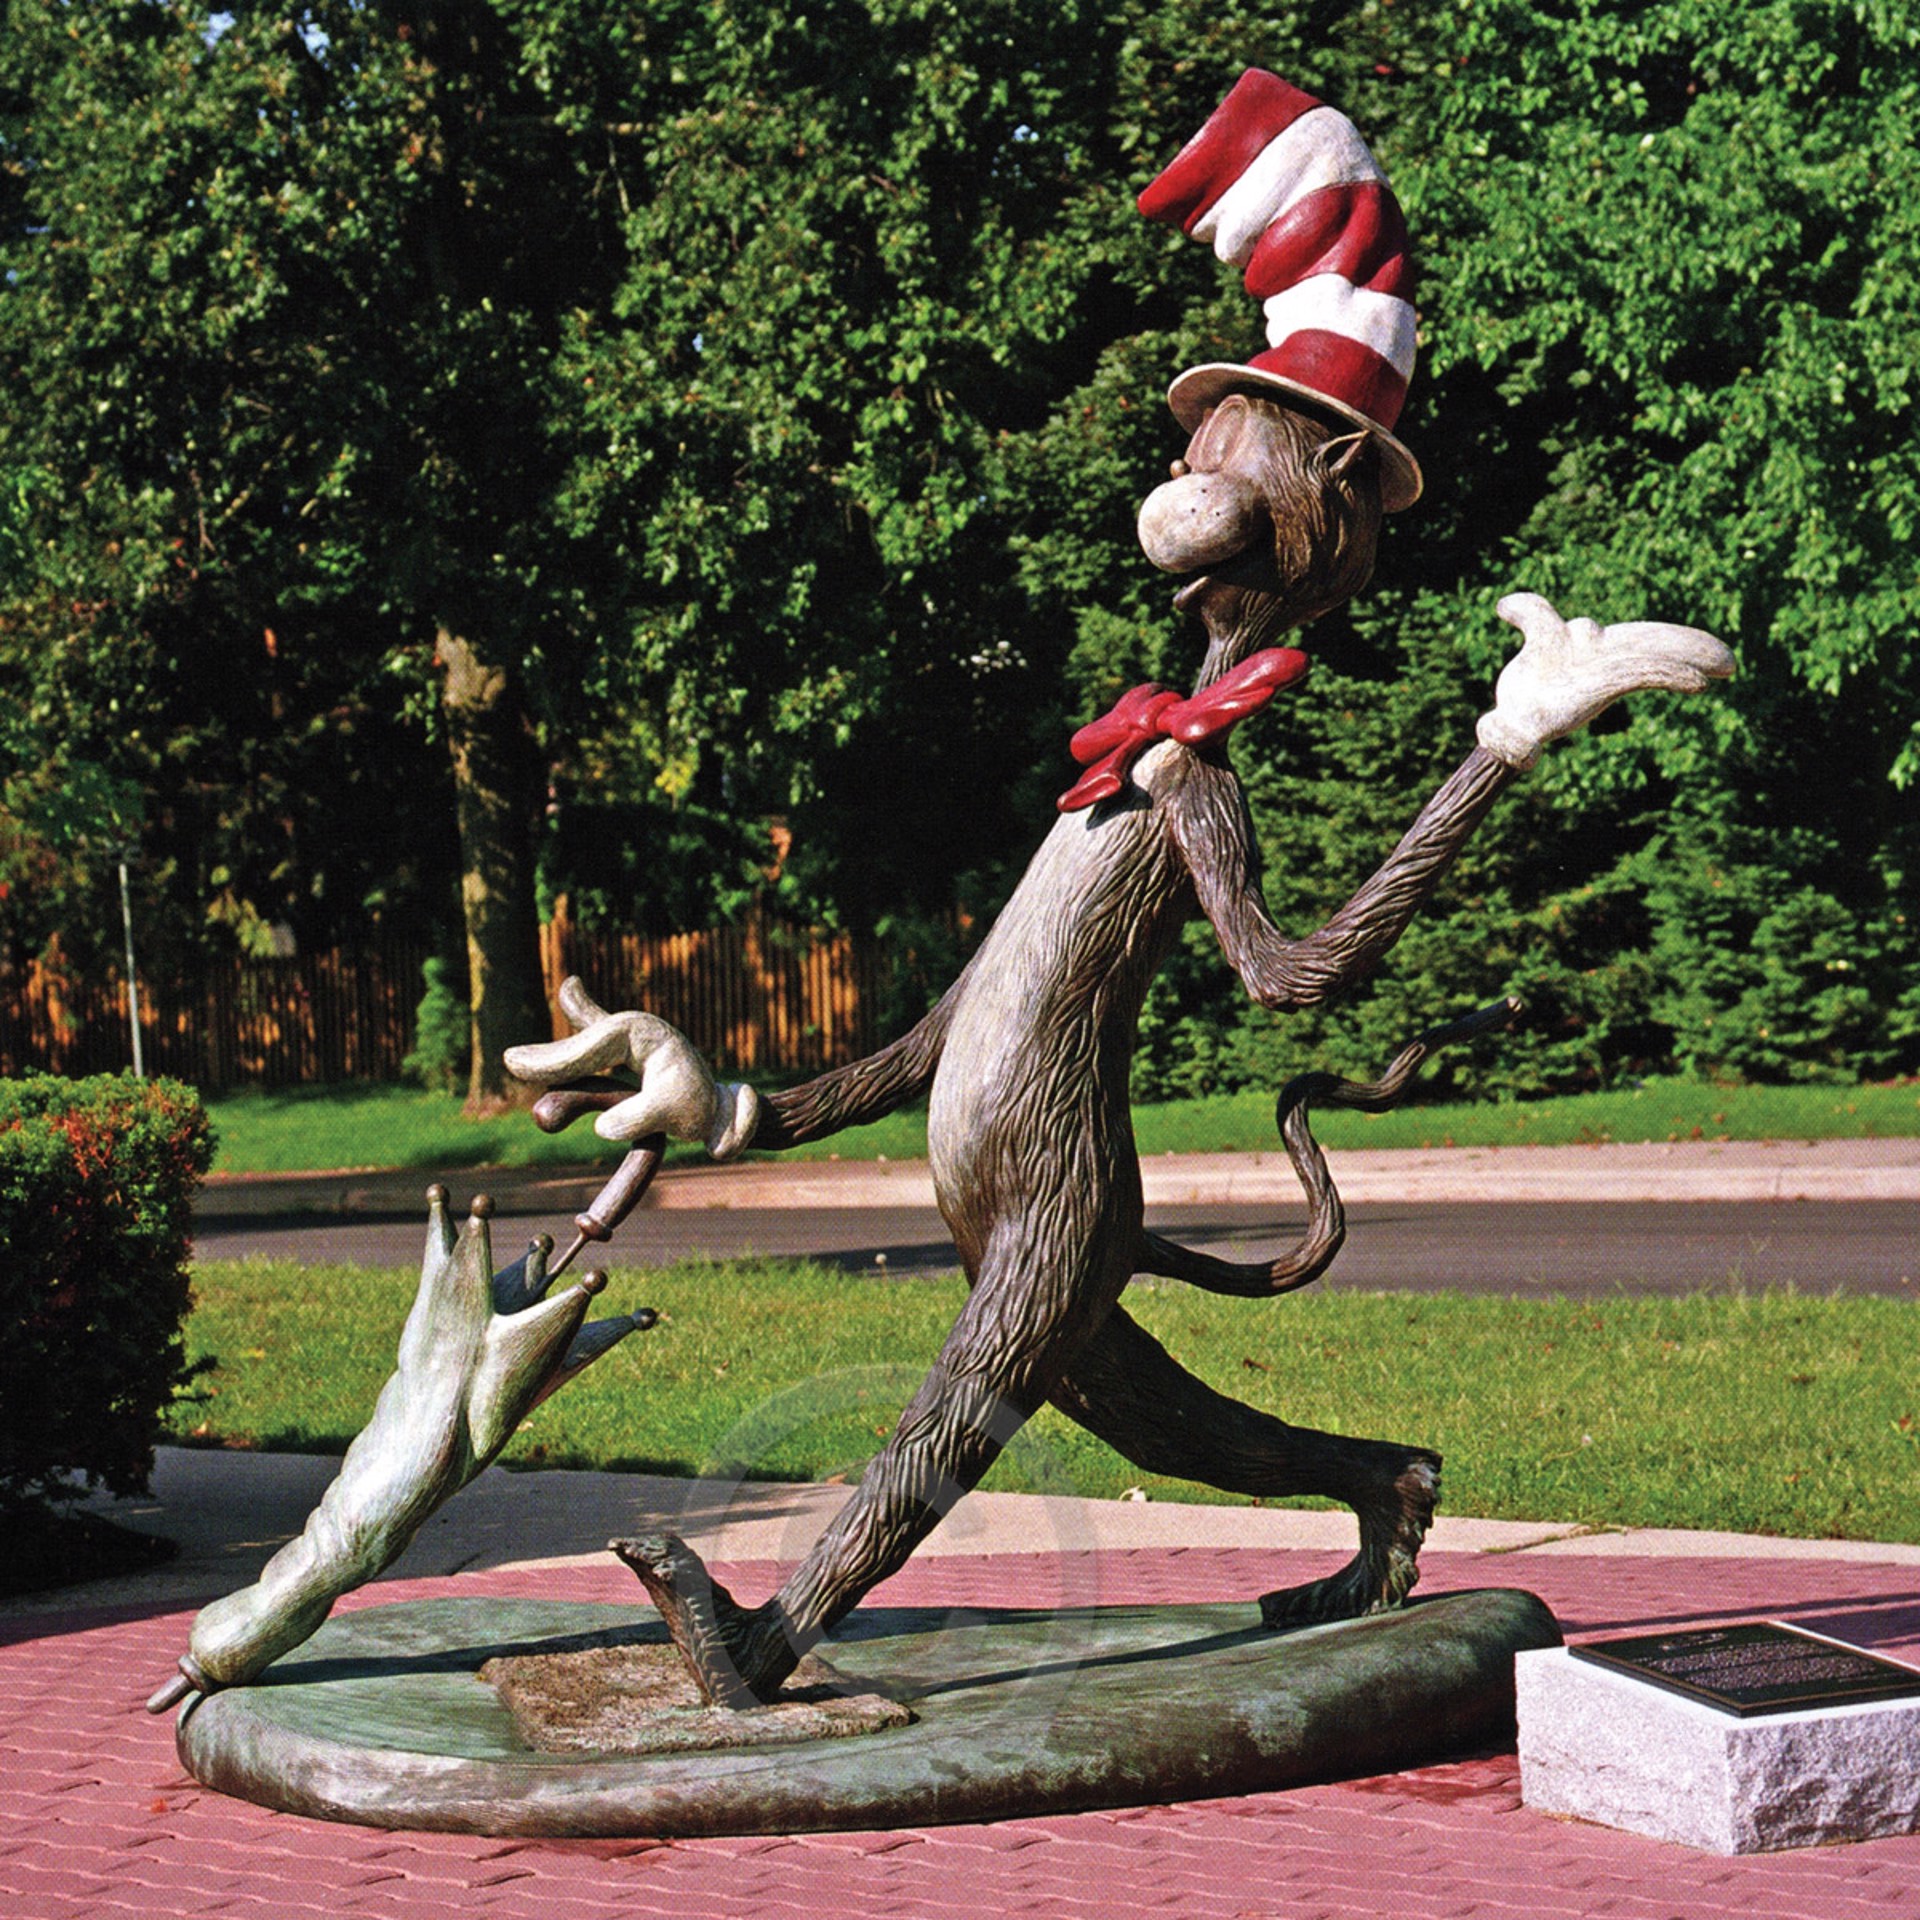 The Cat In The Hat (Monumental) by Dr. Seuss